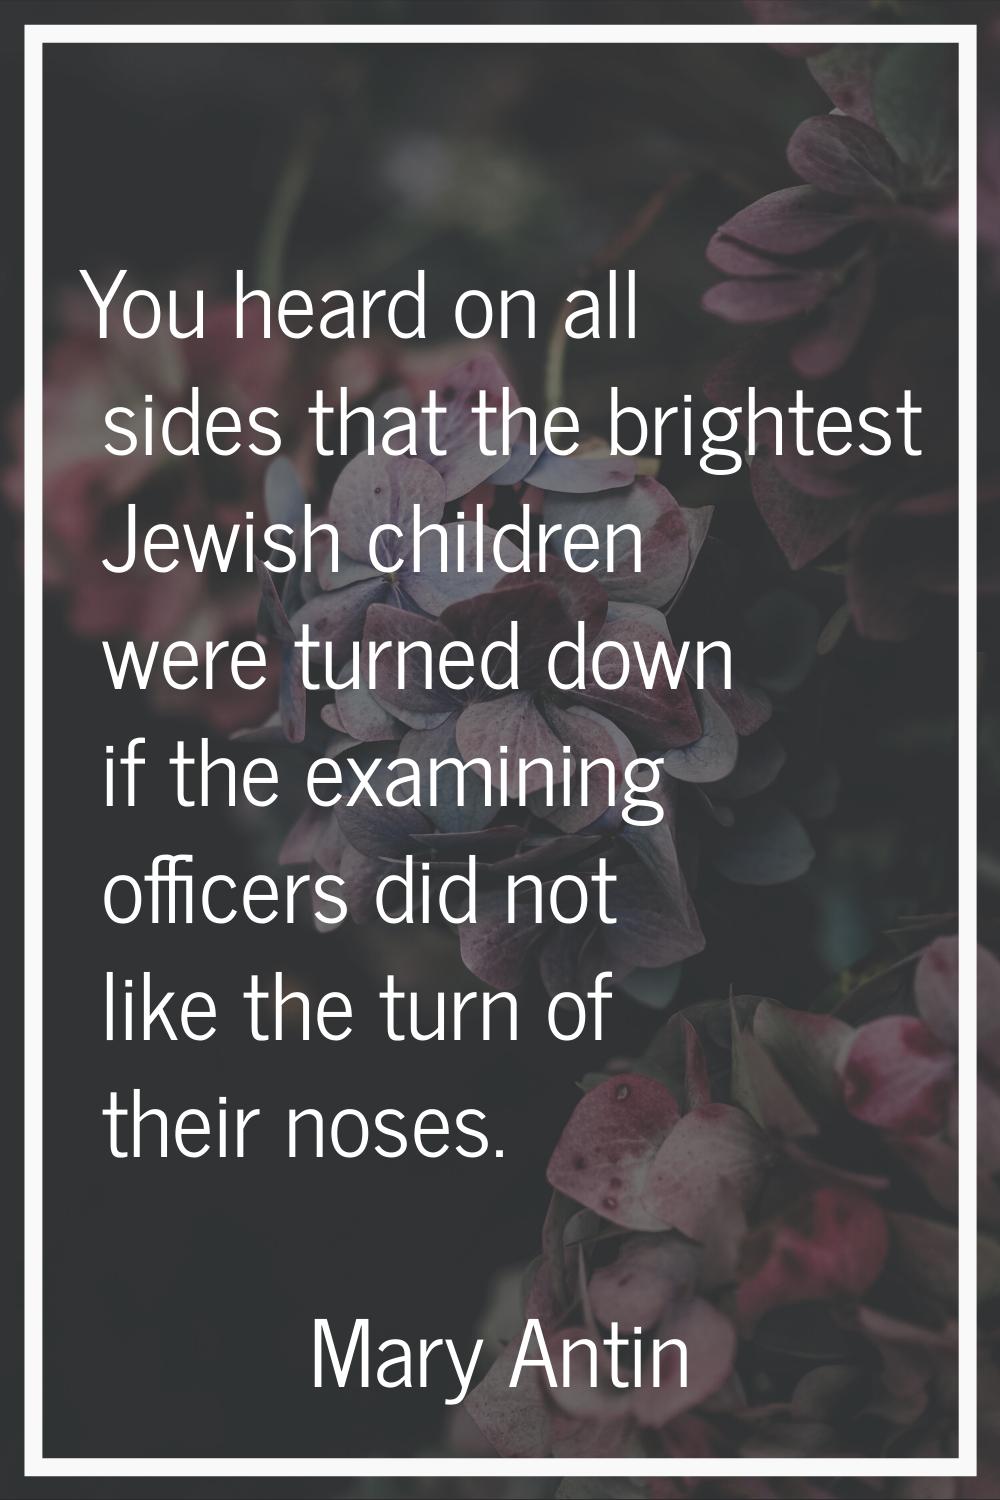 You heard on all sides that the brightest Jewish children were turned down if the examining officer